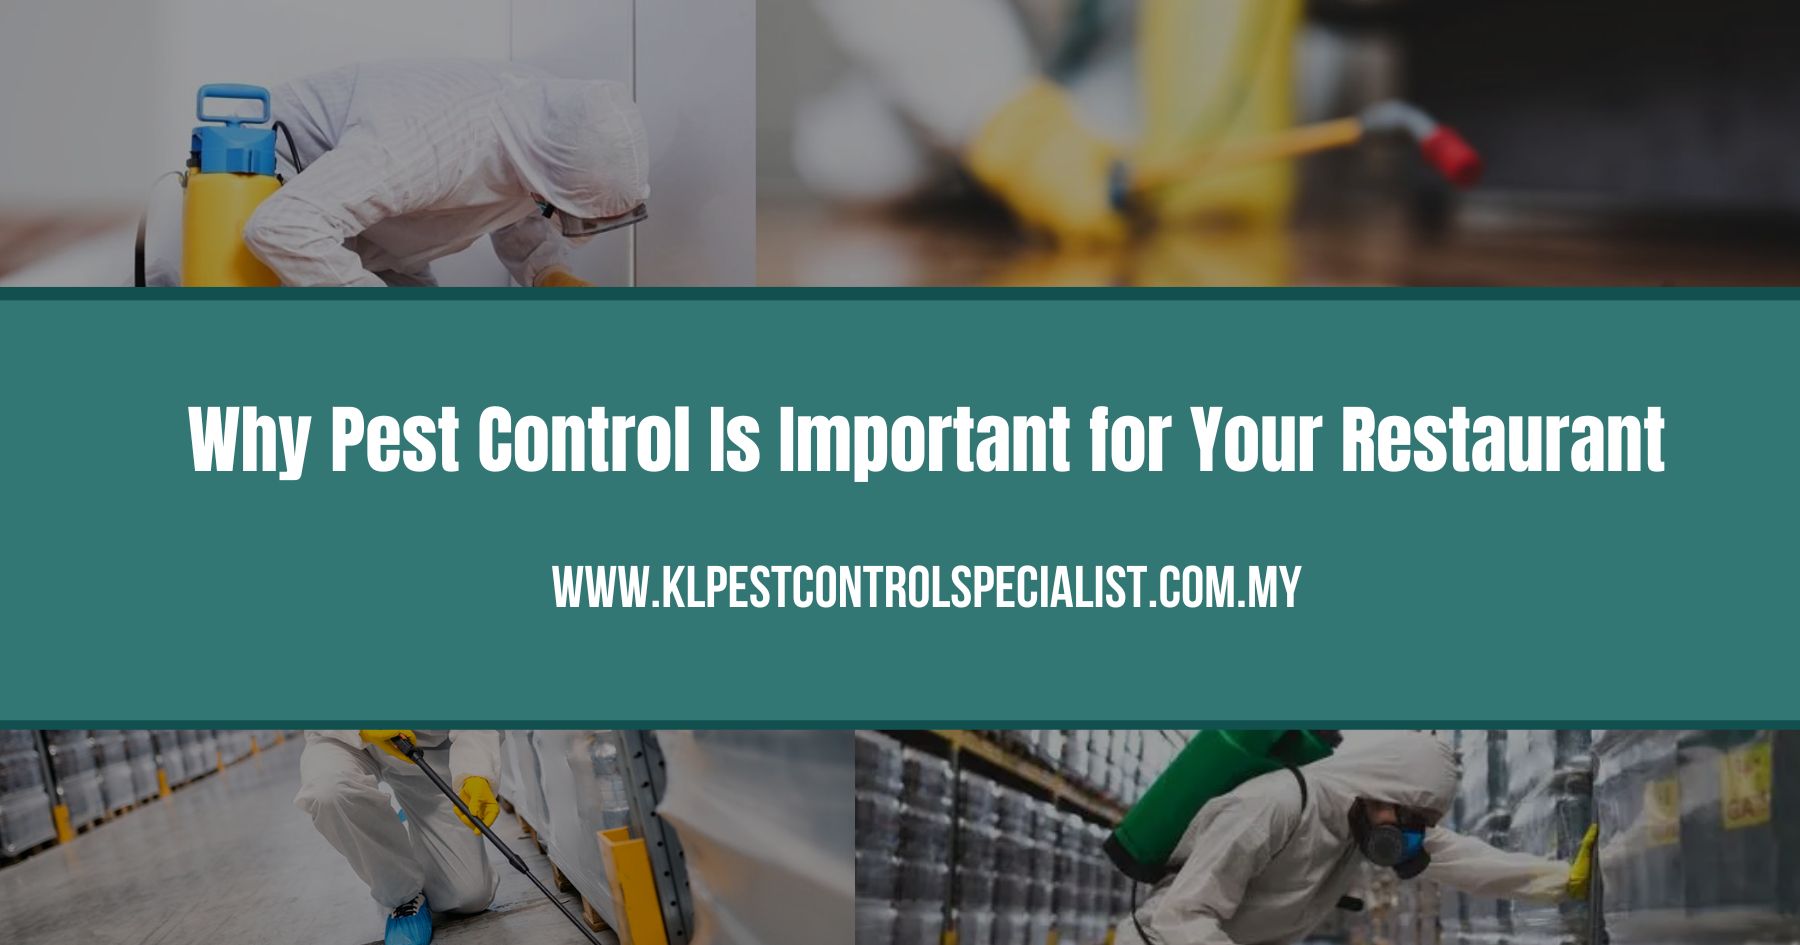 Why Pest Control Is Important for Your Restaurant